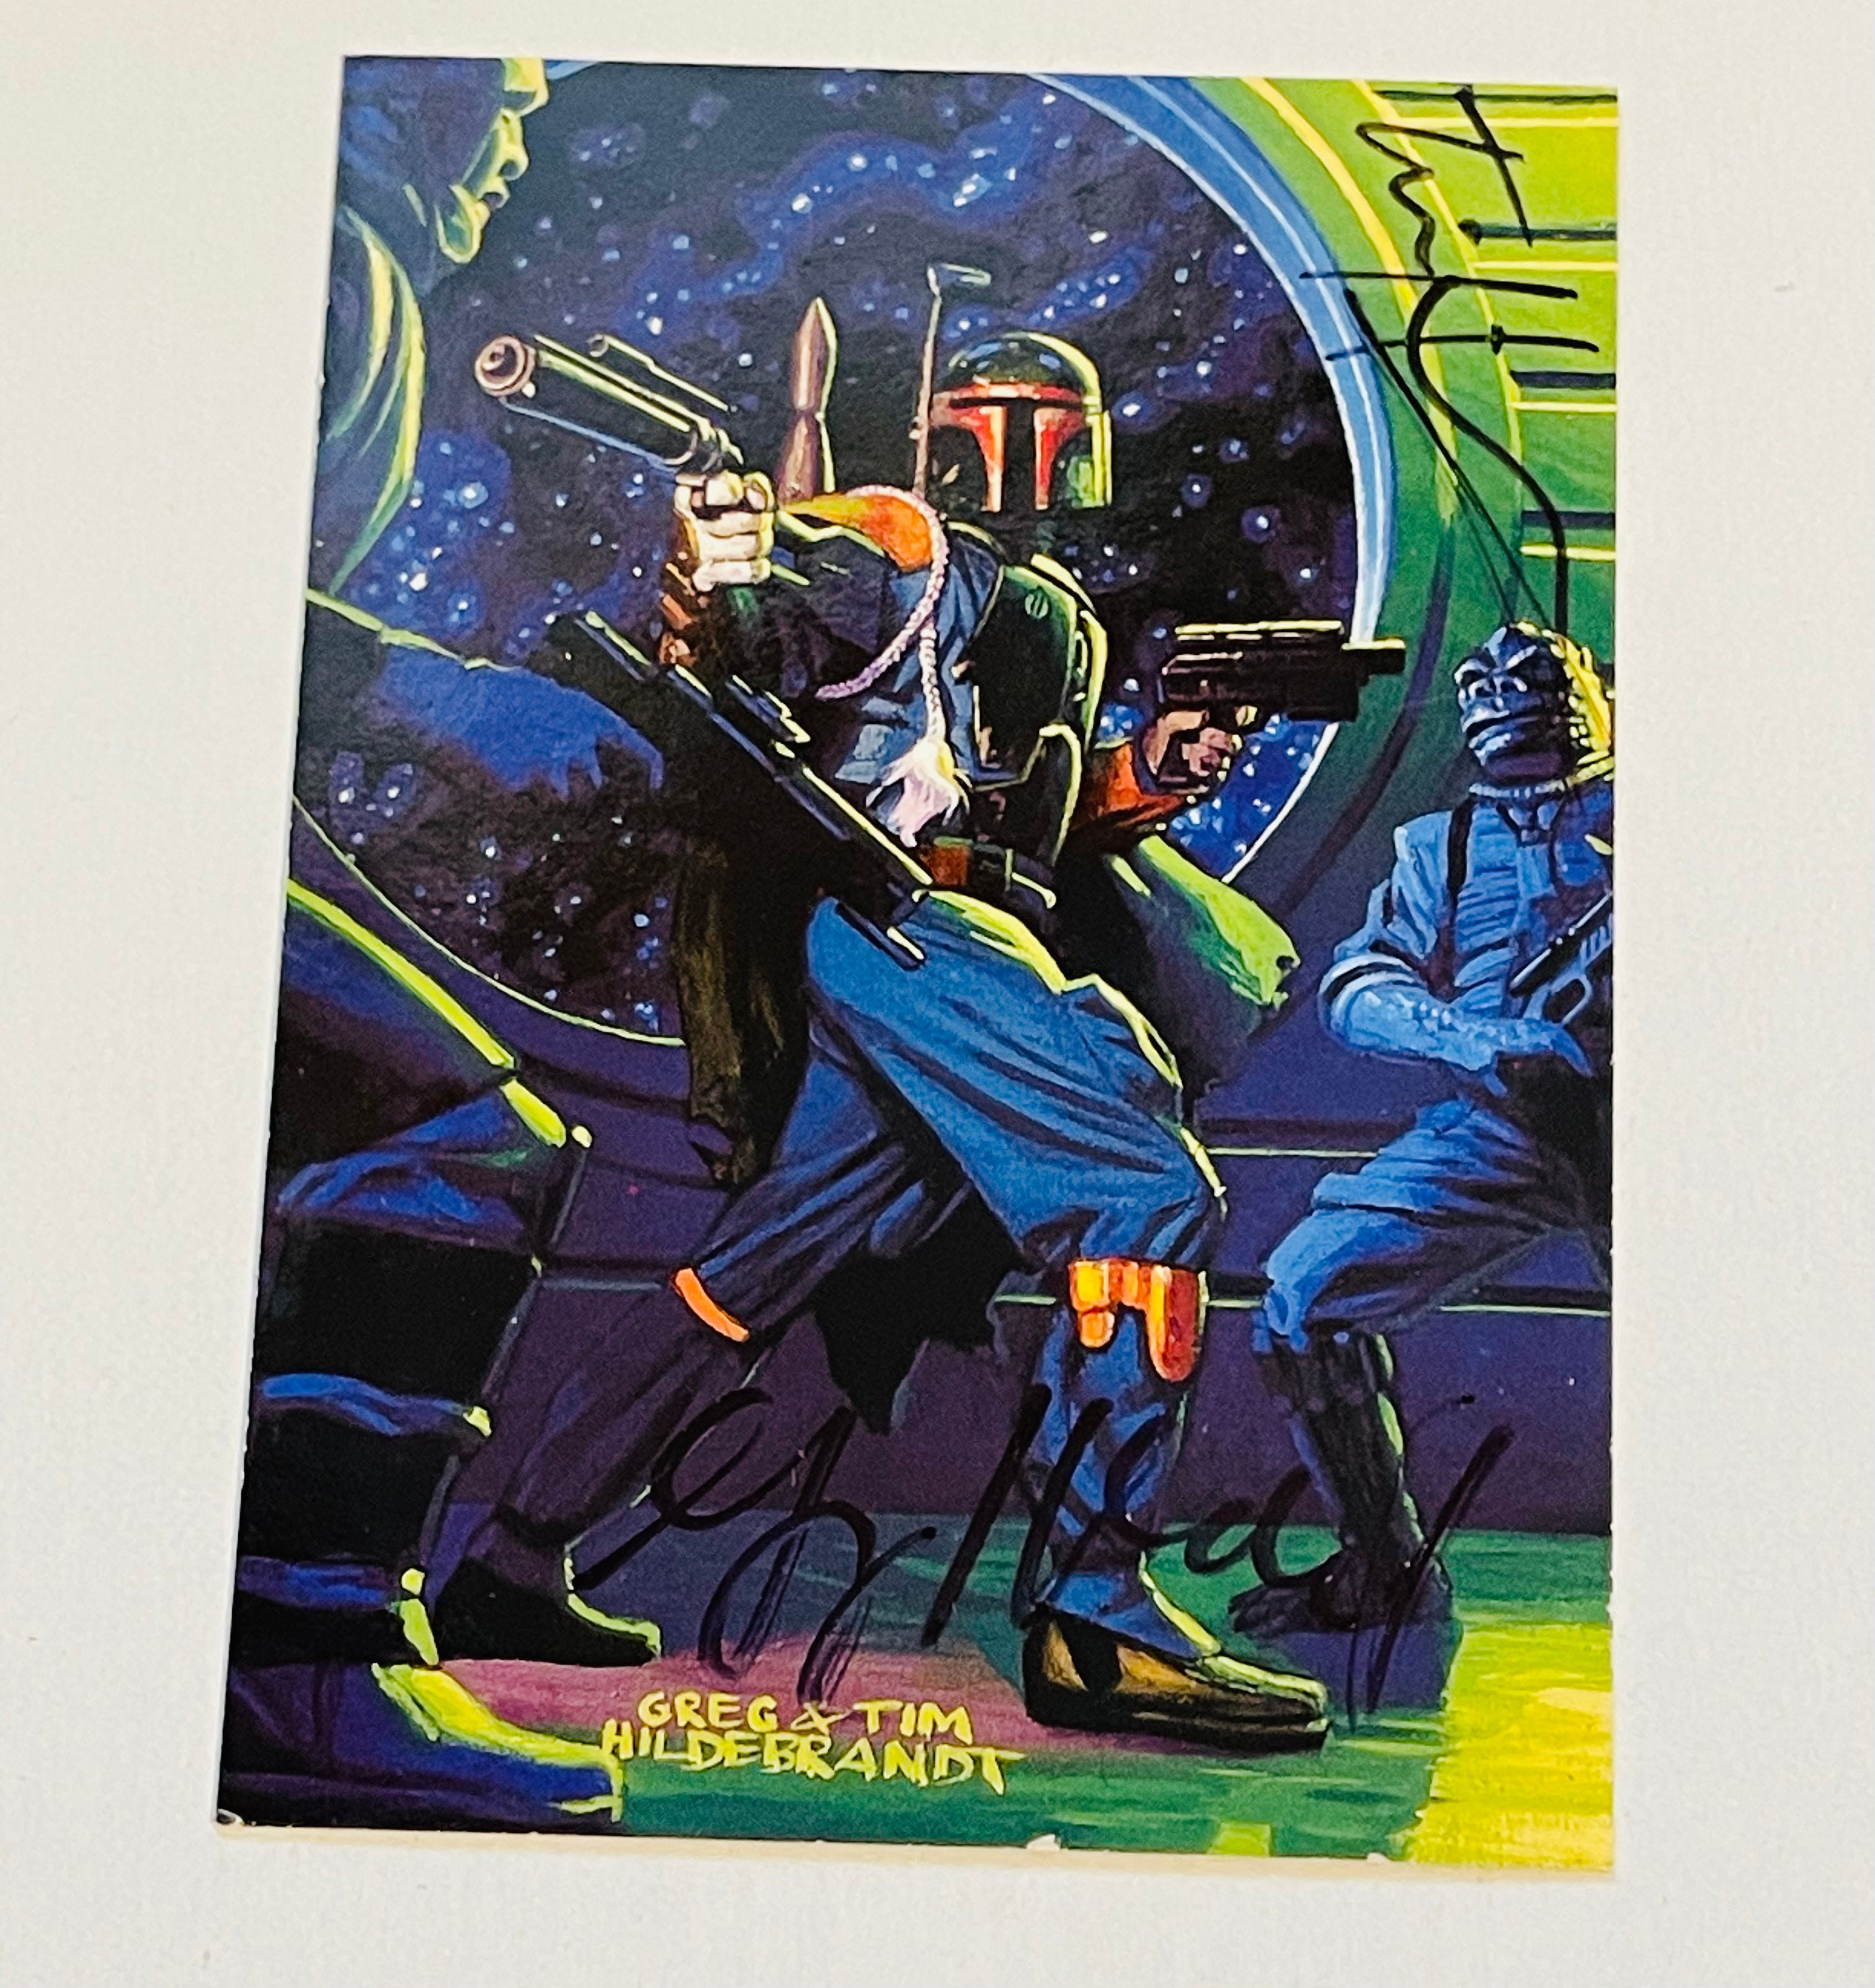 Star Wars autograph card by Greg and Tim Hilderbrandt artists sold with COA